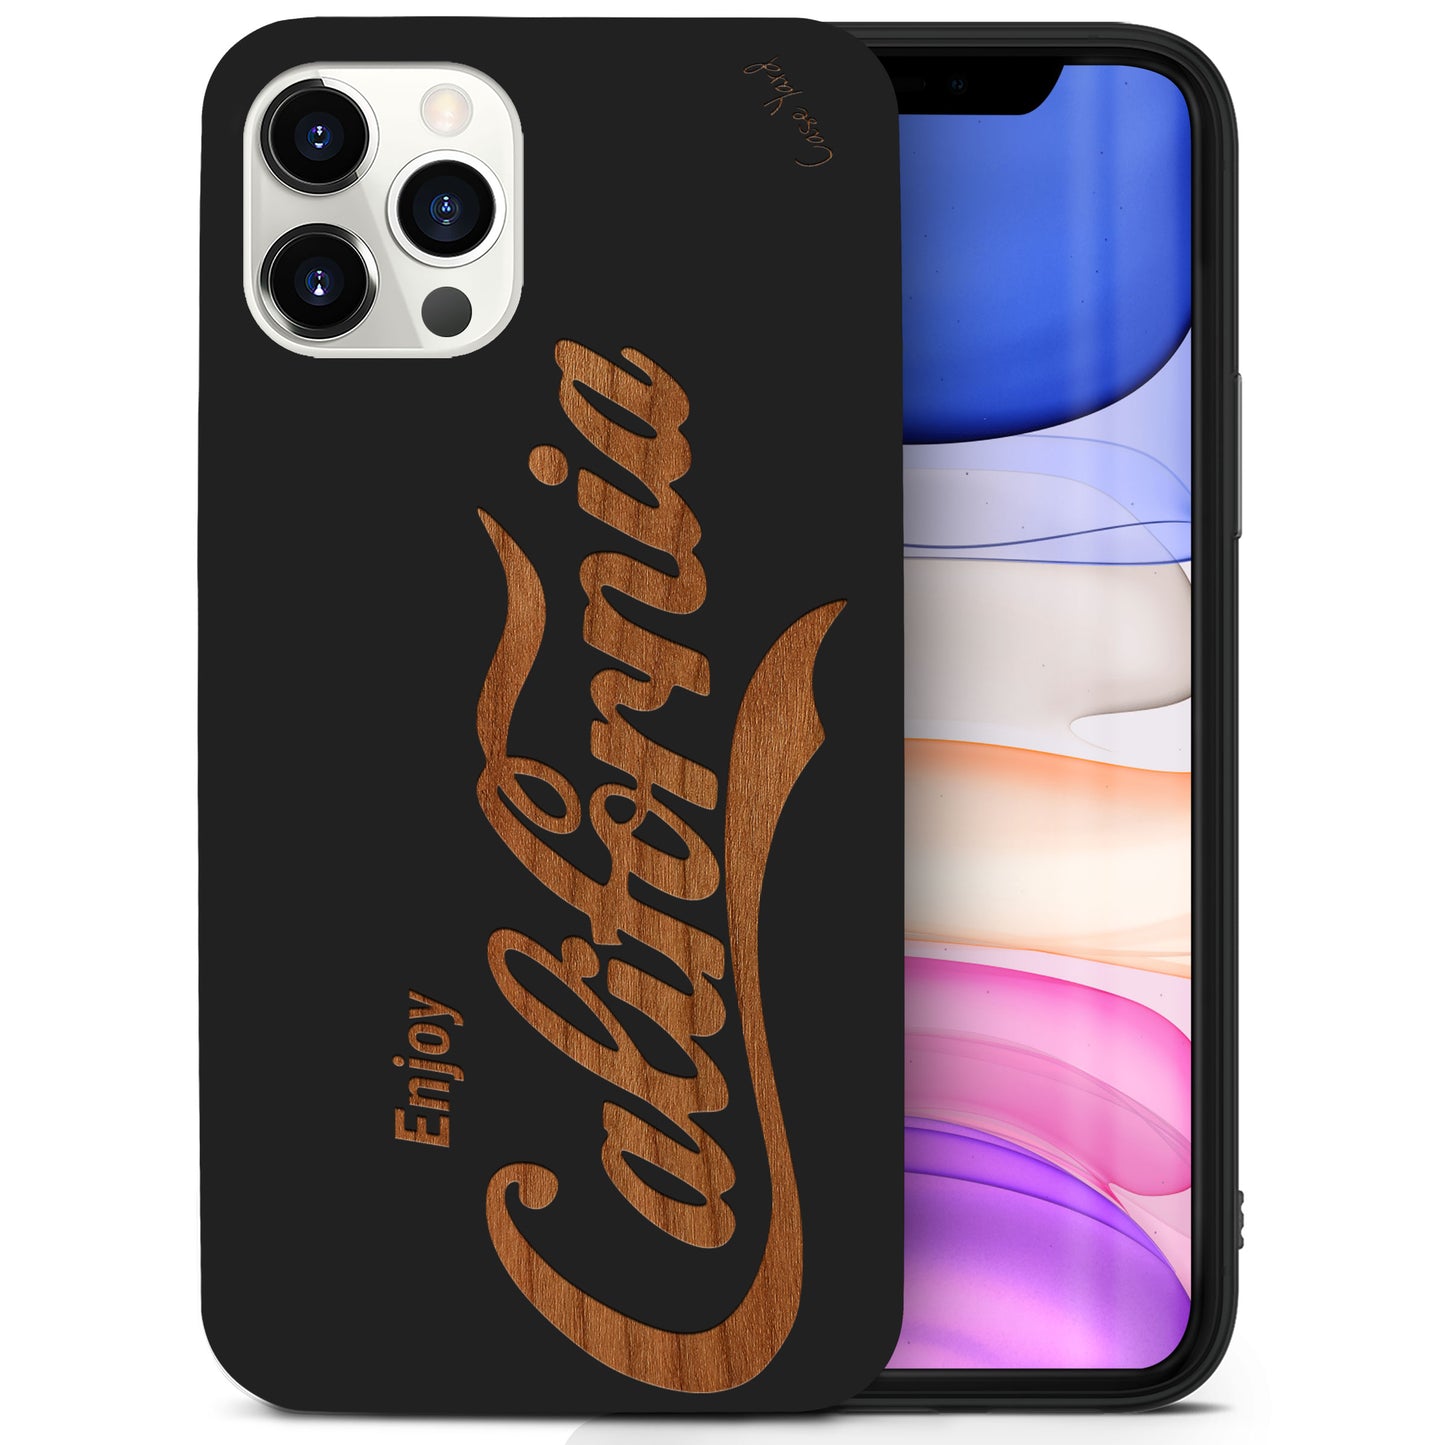 Wooden Cell Phone Case Cover, Laser Engraved case for iPhone & Samsung phone Enjoy California Design